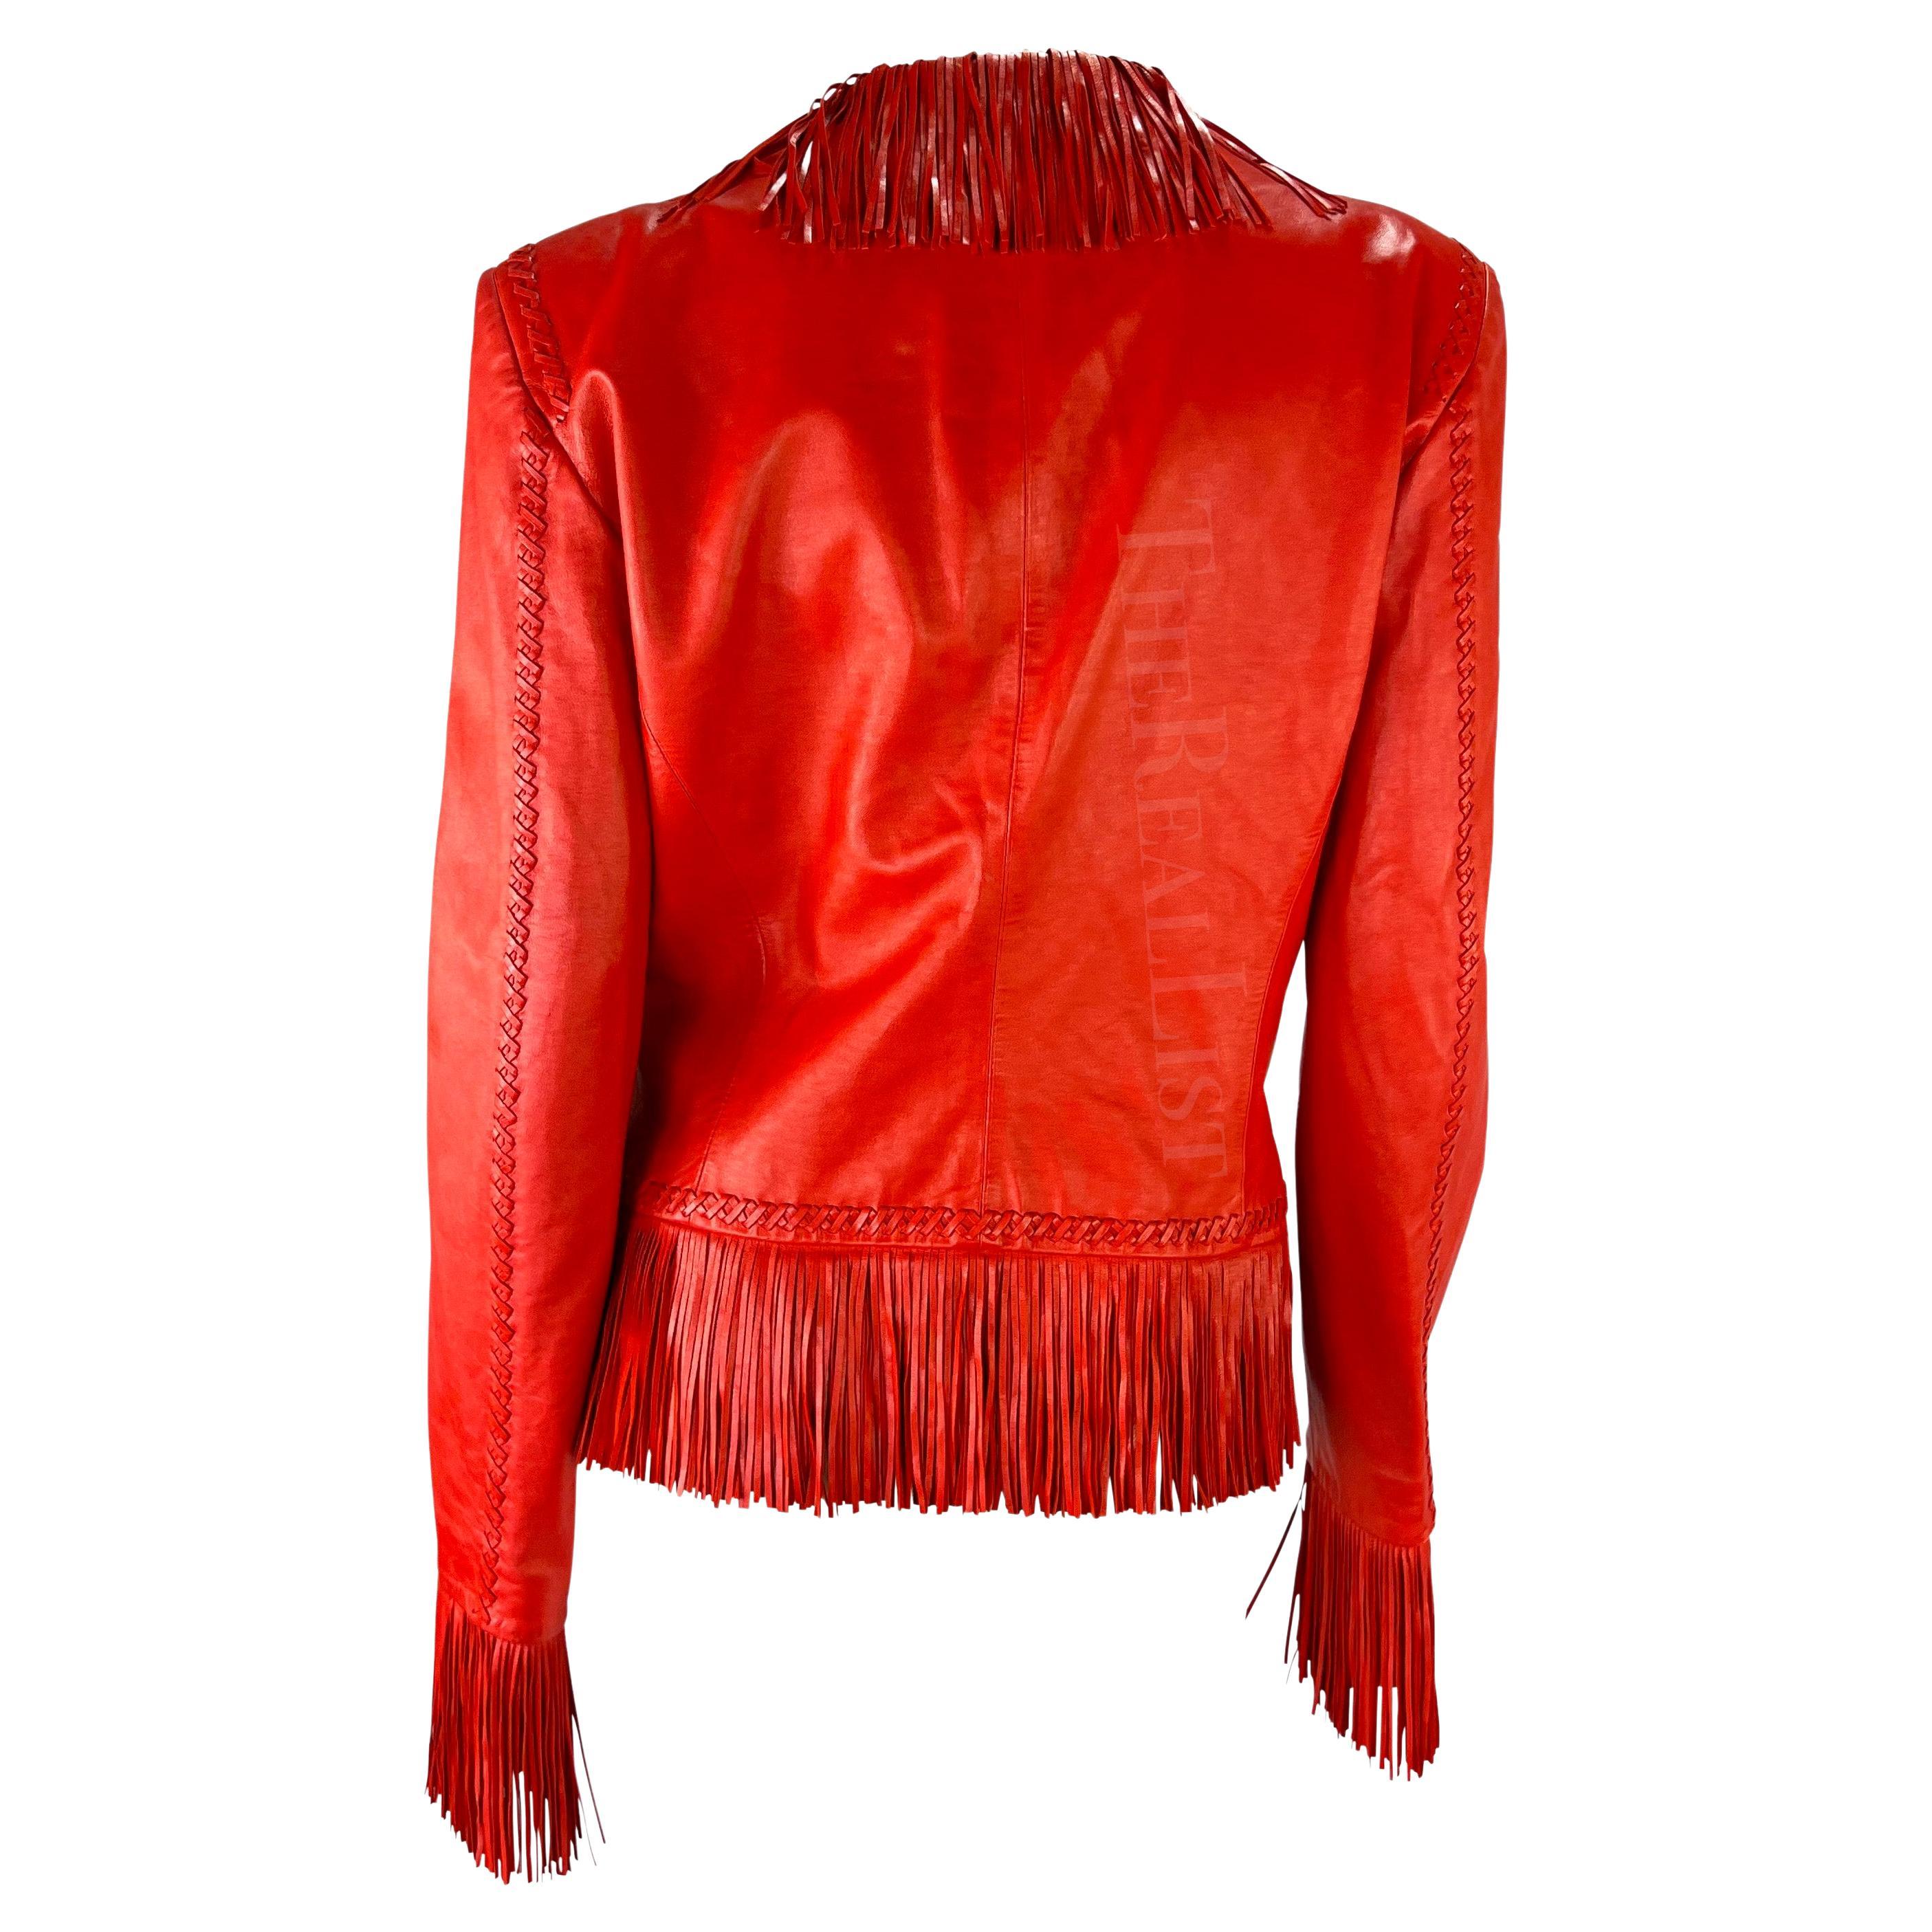 Women's S/S 2002 Gianni Versace by Donatella Red Fringe Leather Jacket For Sale